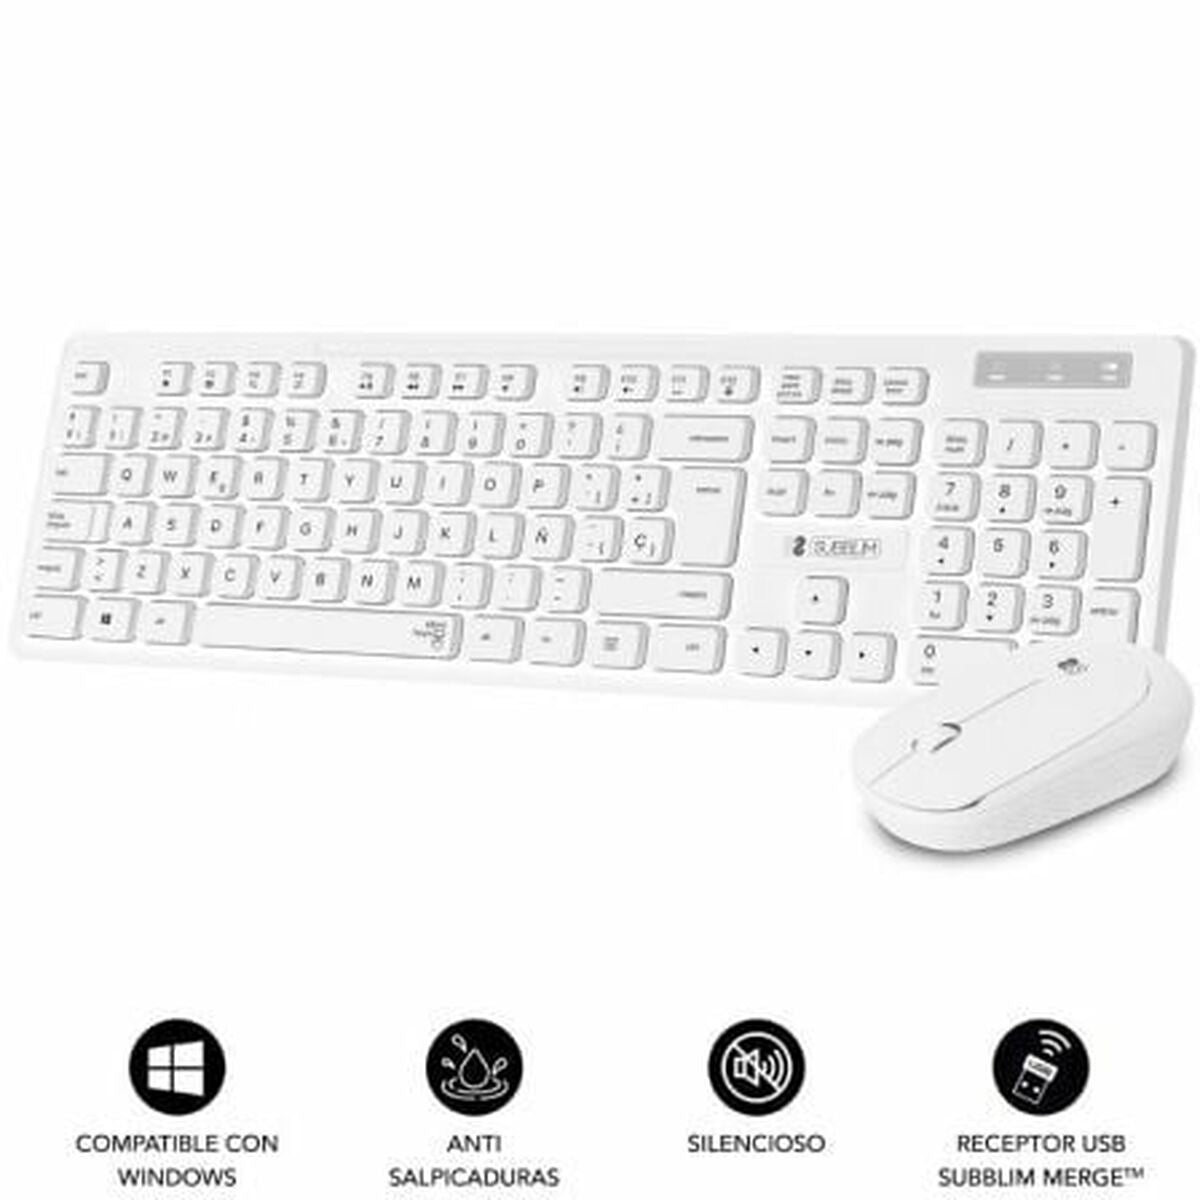 Keyboard and Wireless Mouse Subblim SUBKBC-CSSW11 White Spanish Qwerty, Subblim, Computing, Accessories, keyboard-and-wireless-mouse-subblim-subkbc-cssw11-white-spanish-qwerty, Brand_Subblim, category-reference-2609, category-reference-2642, category-reference-2646, category-reference-t-19685, category-reference-t-19908, category-reference-t-21353, category-reference-t-25625, computers / peripherals, Condition_NEW, office, Price_20 - 50, Teleworking, RiotNook